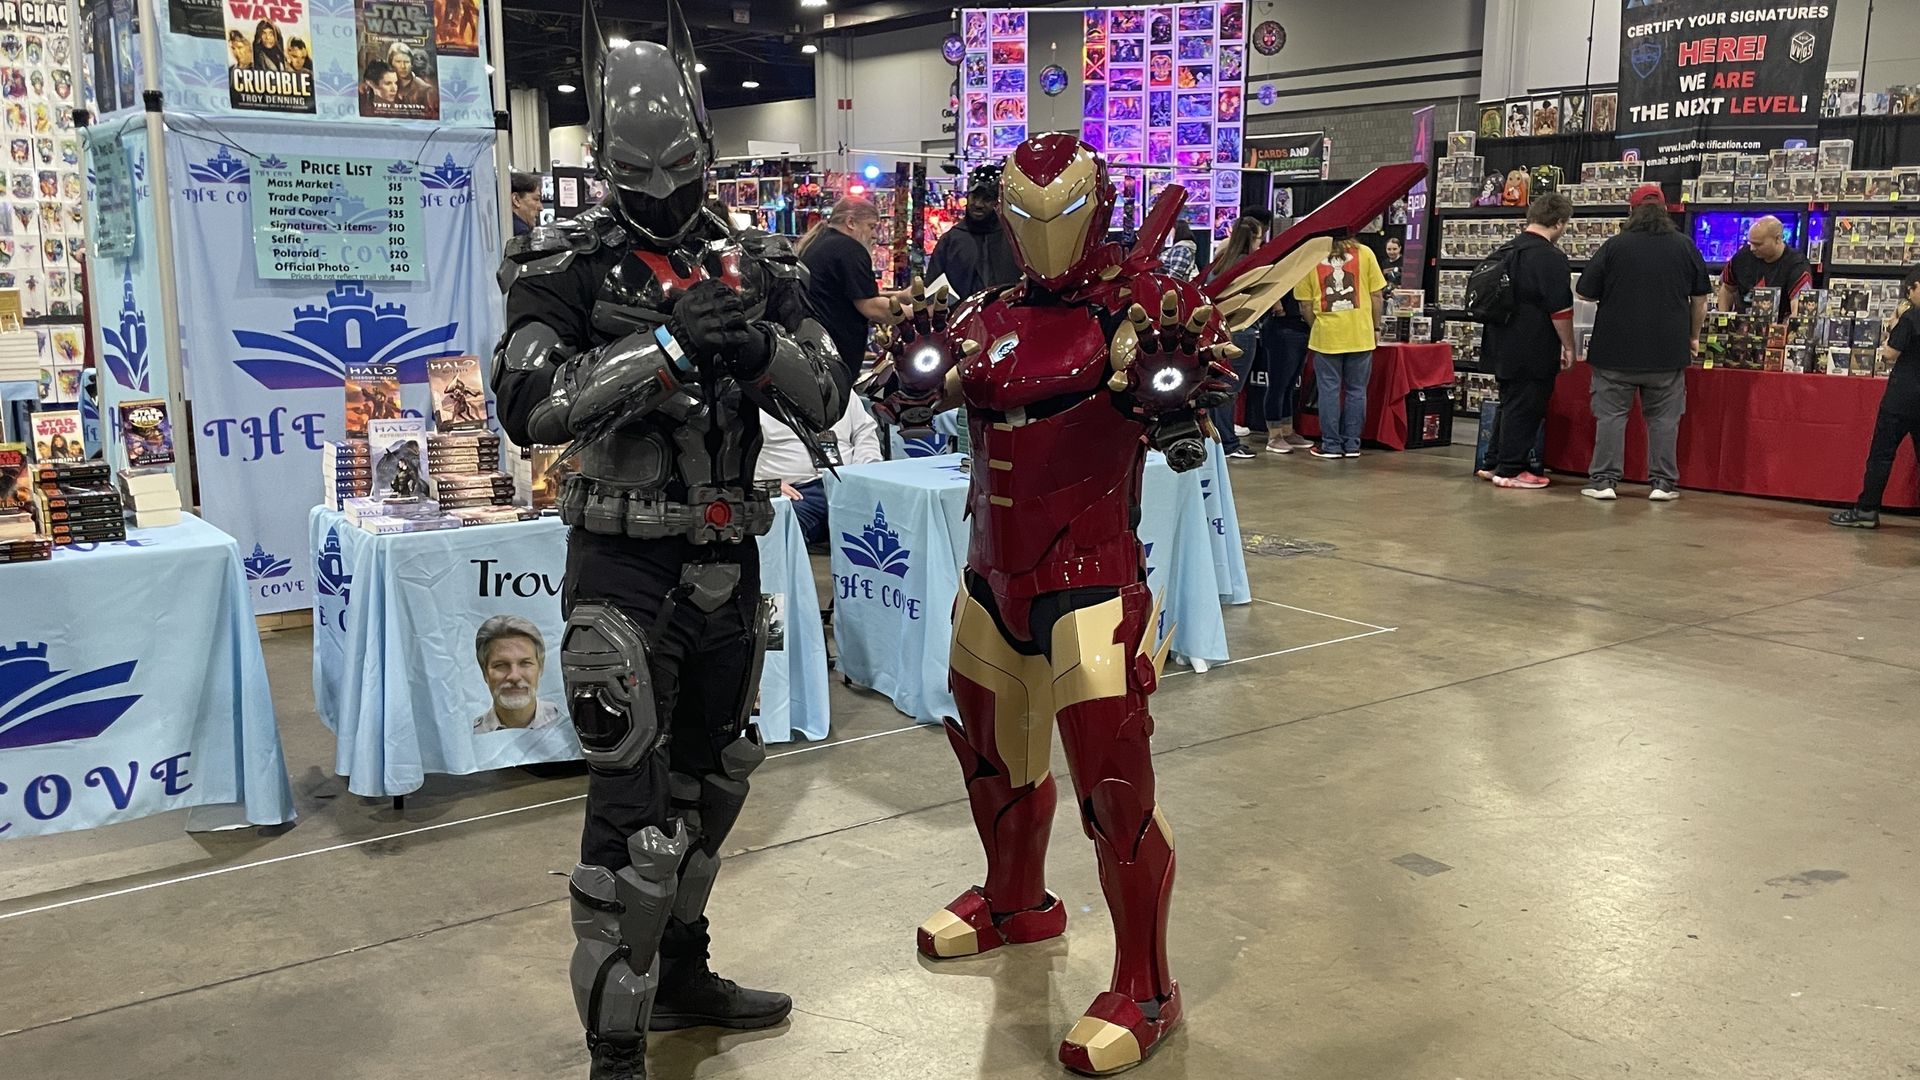 Photo of two men in cosplay, the man to the left is wearing the armored "Hellbat" Batman suit and the man on the right is wearing the Iron Man suit.